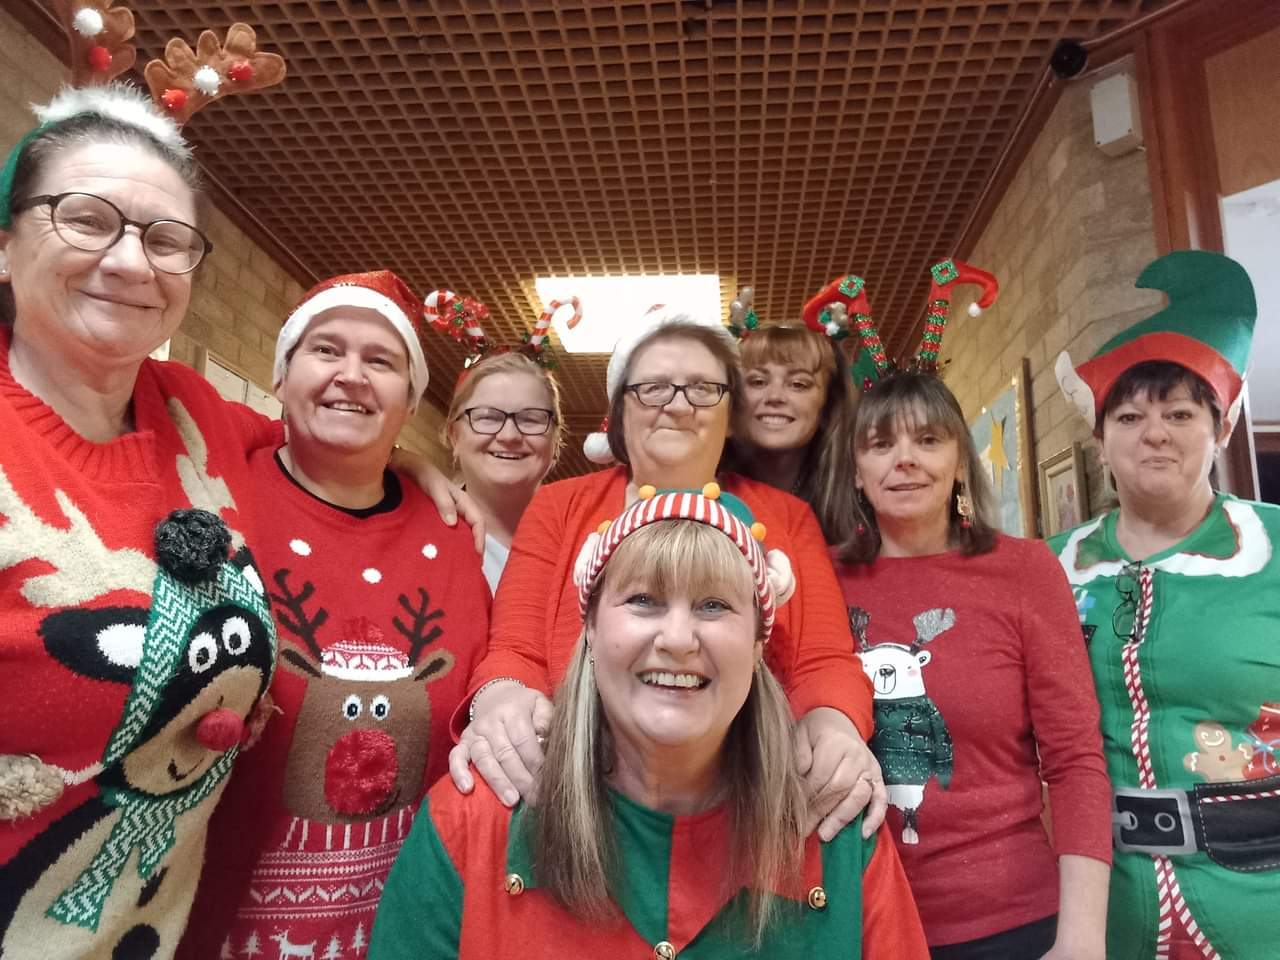 employees dressed up as elves on Christmas Day